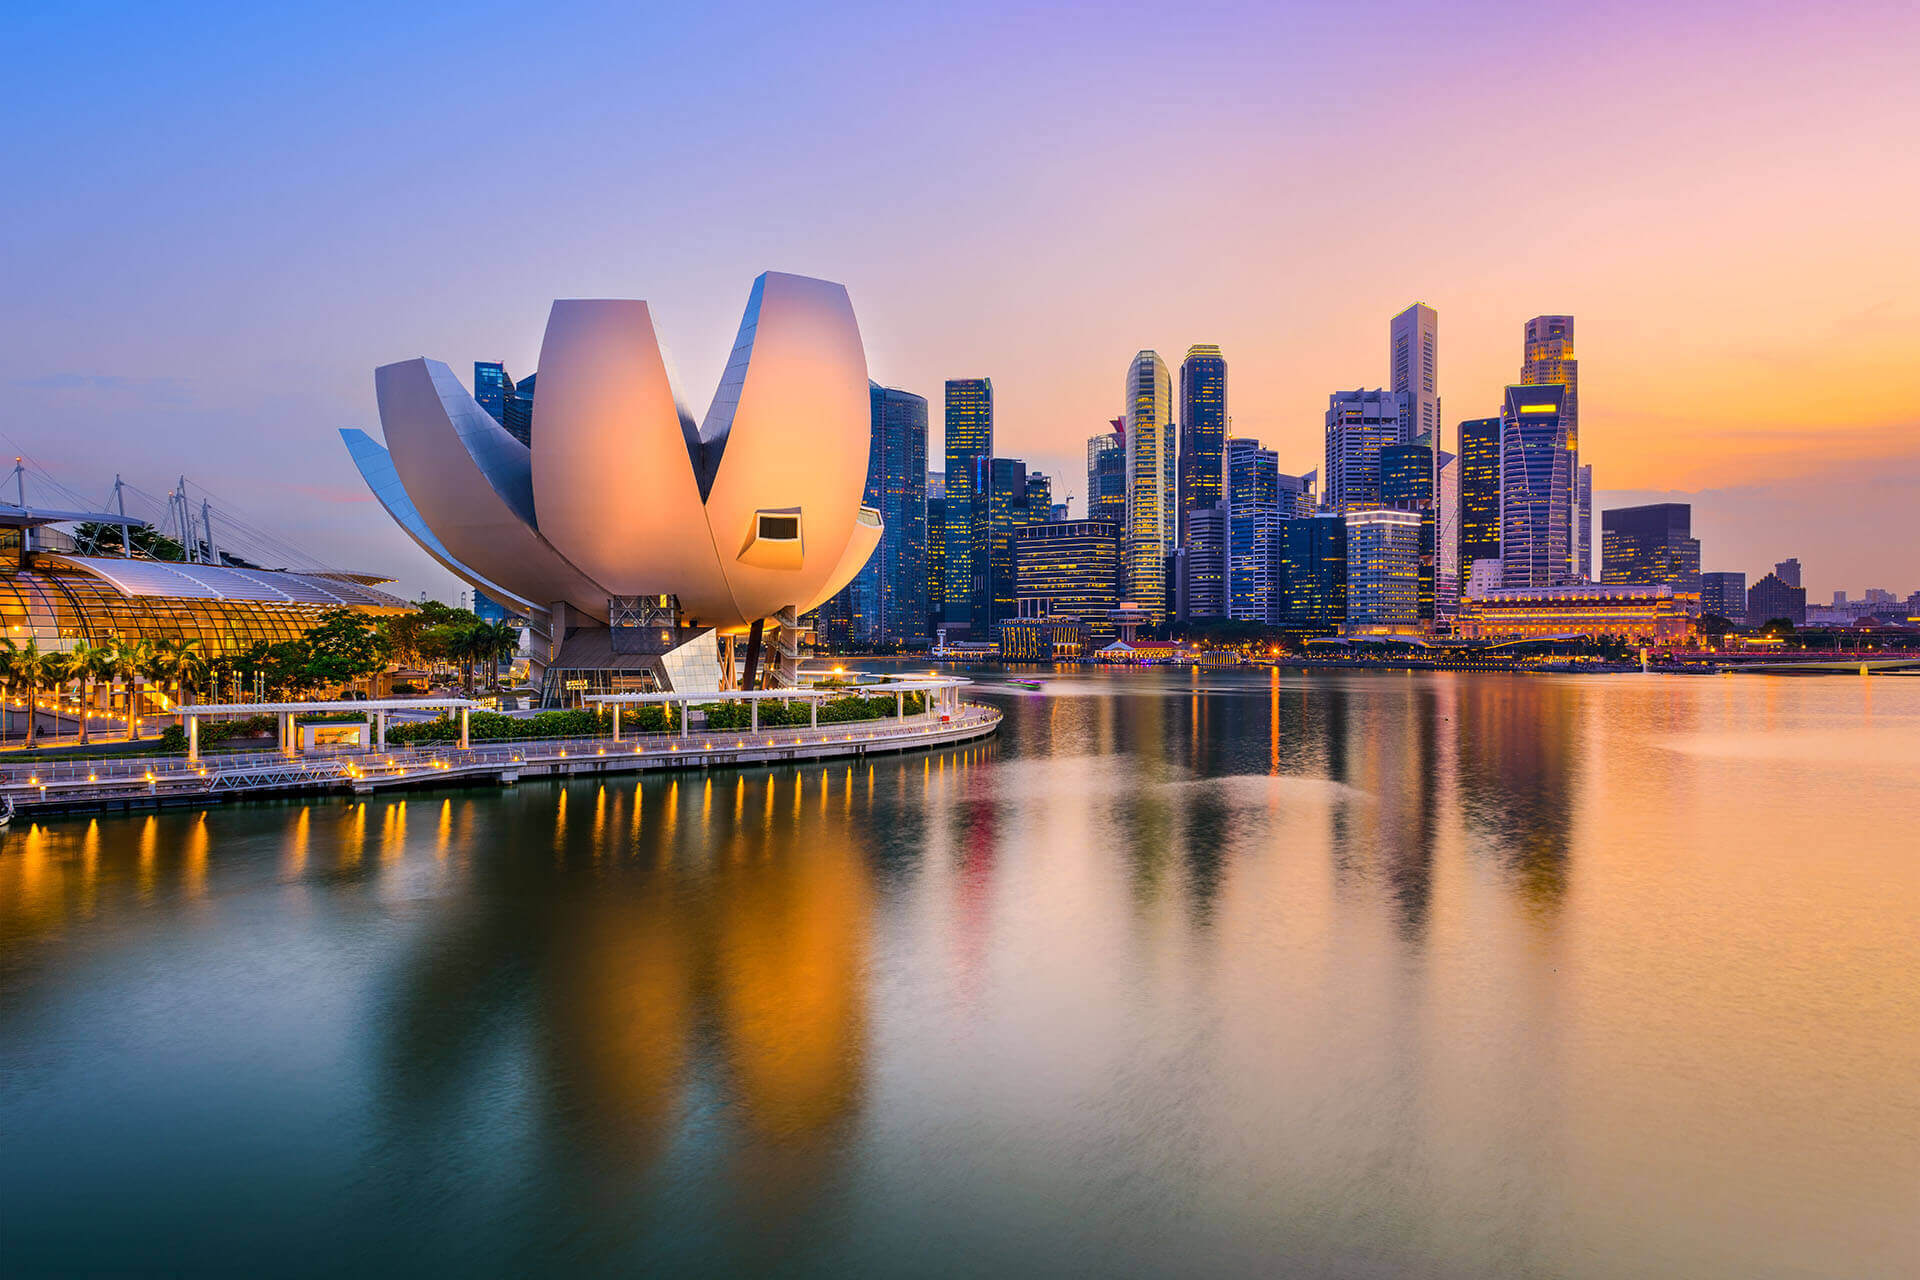 Singapore: Updated Requirements for Unvaccinated Travelers